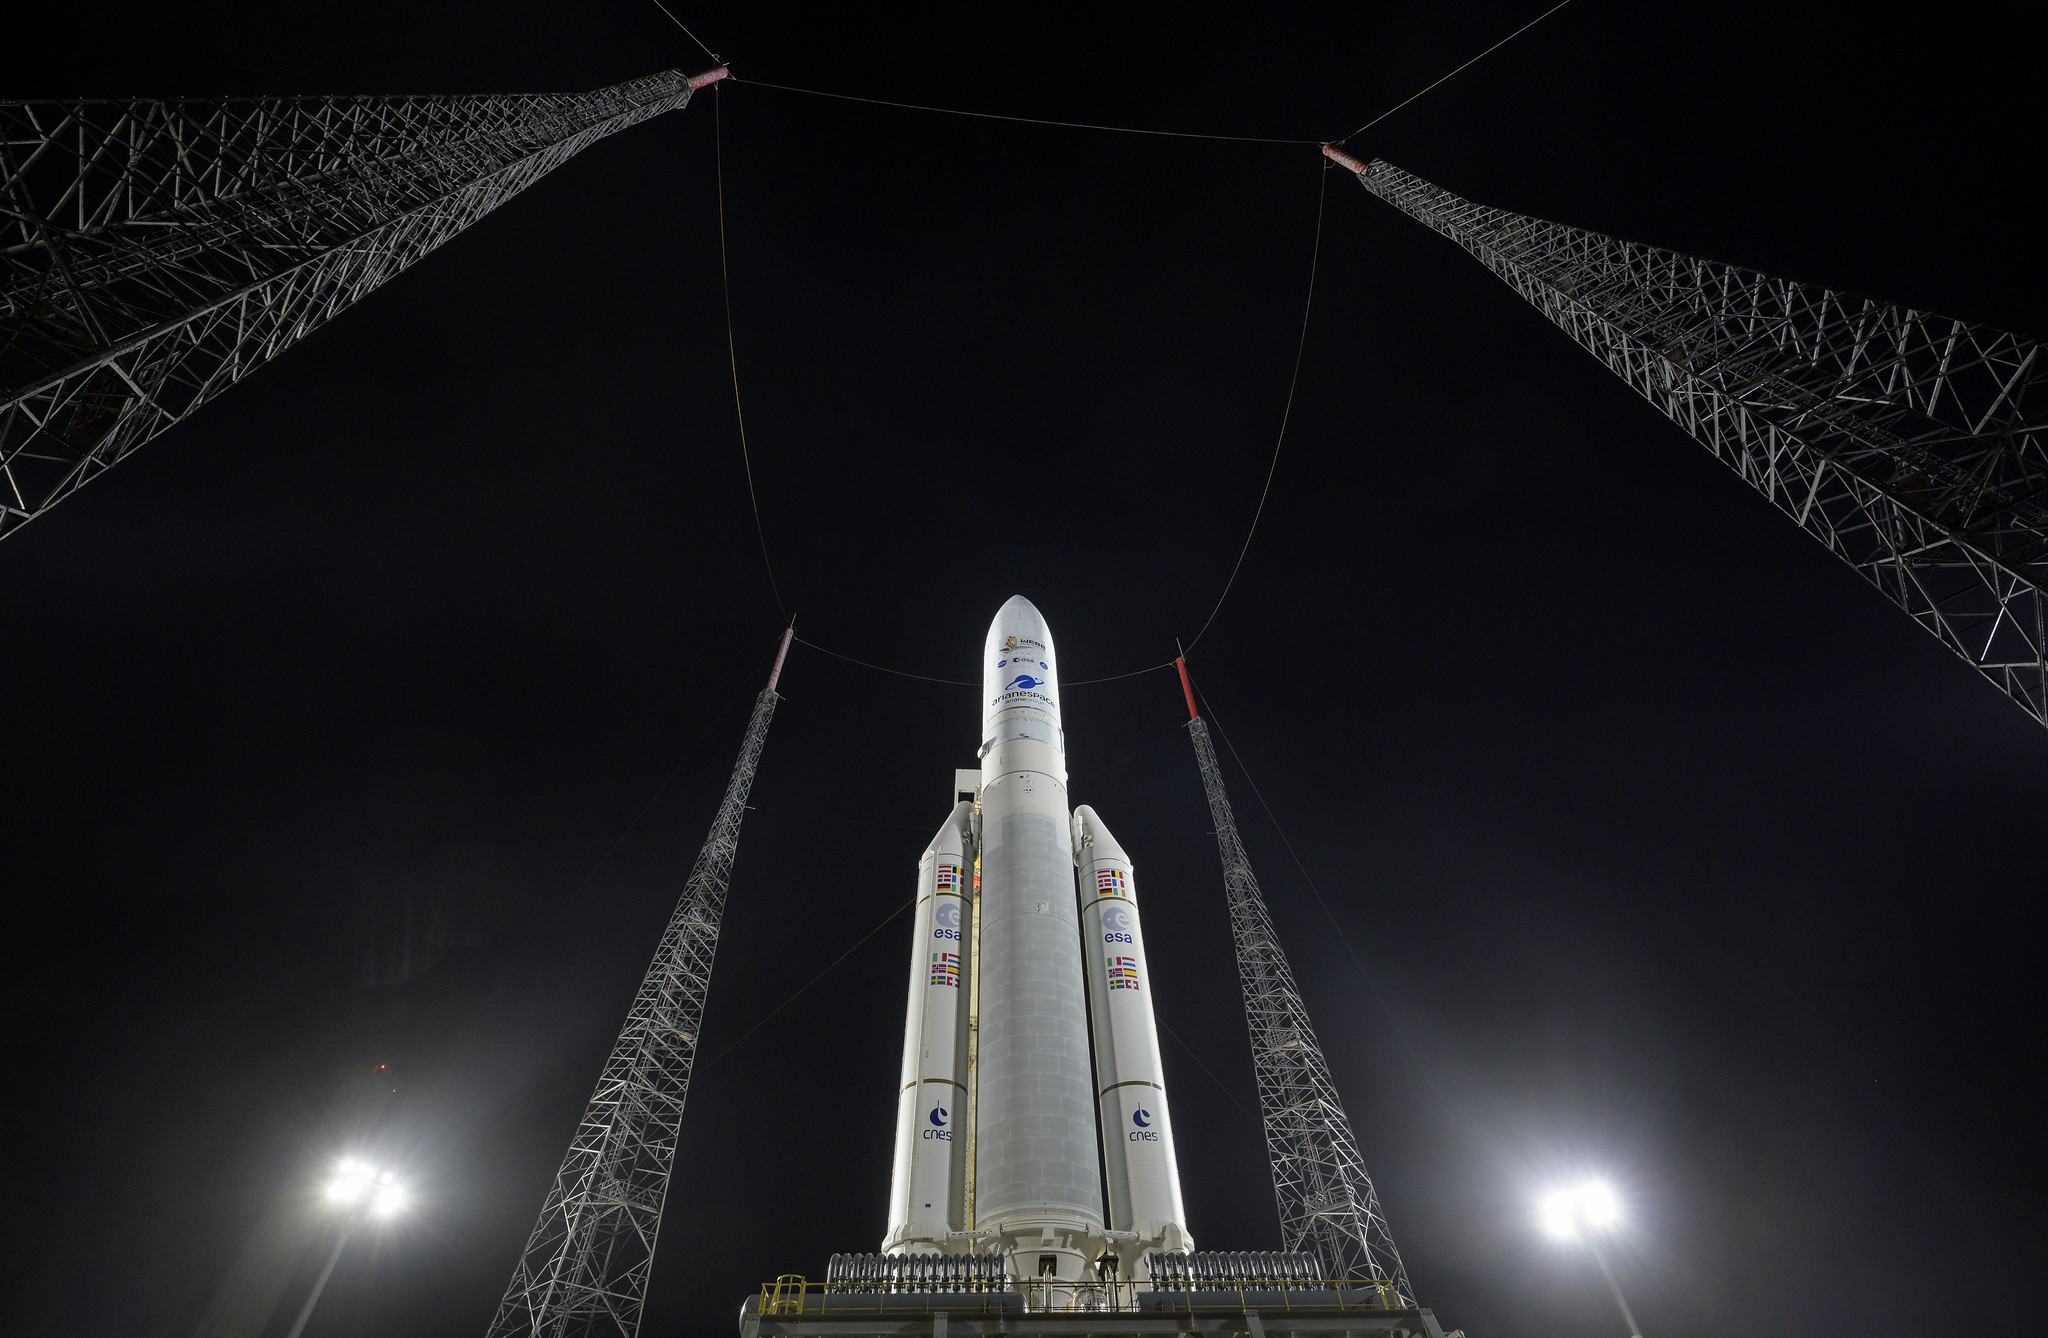 Daily News | Online News The Ariane 5 rocket carrying the James Webb Space Telescope as seen on the launch pad in Kourou, French Guiana, the evening of Dec. 24, 2021.